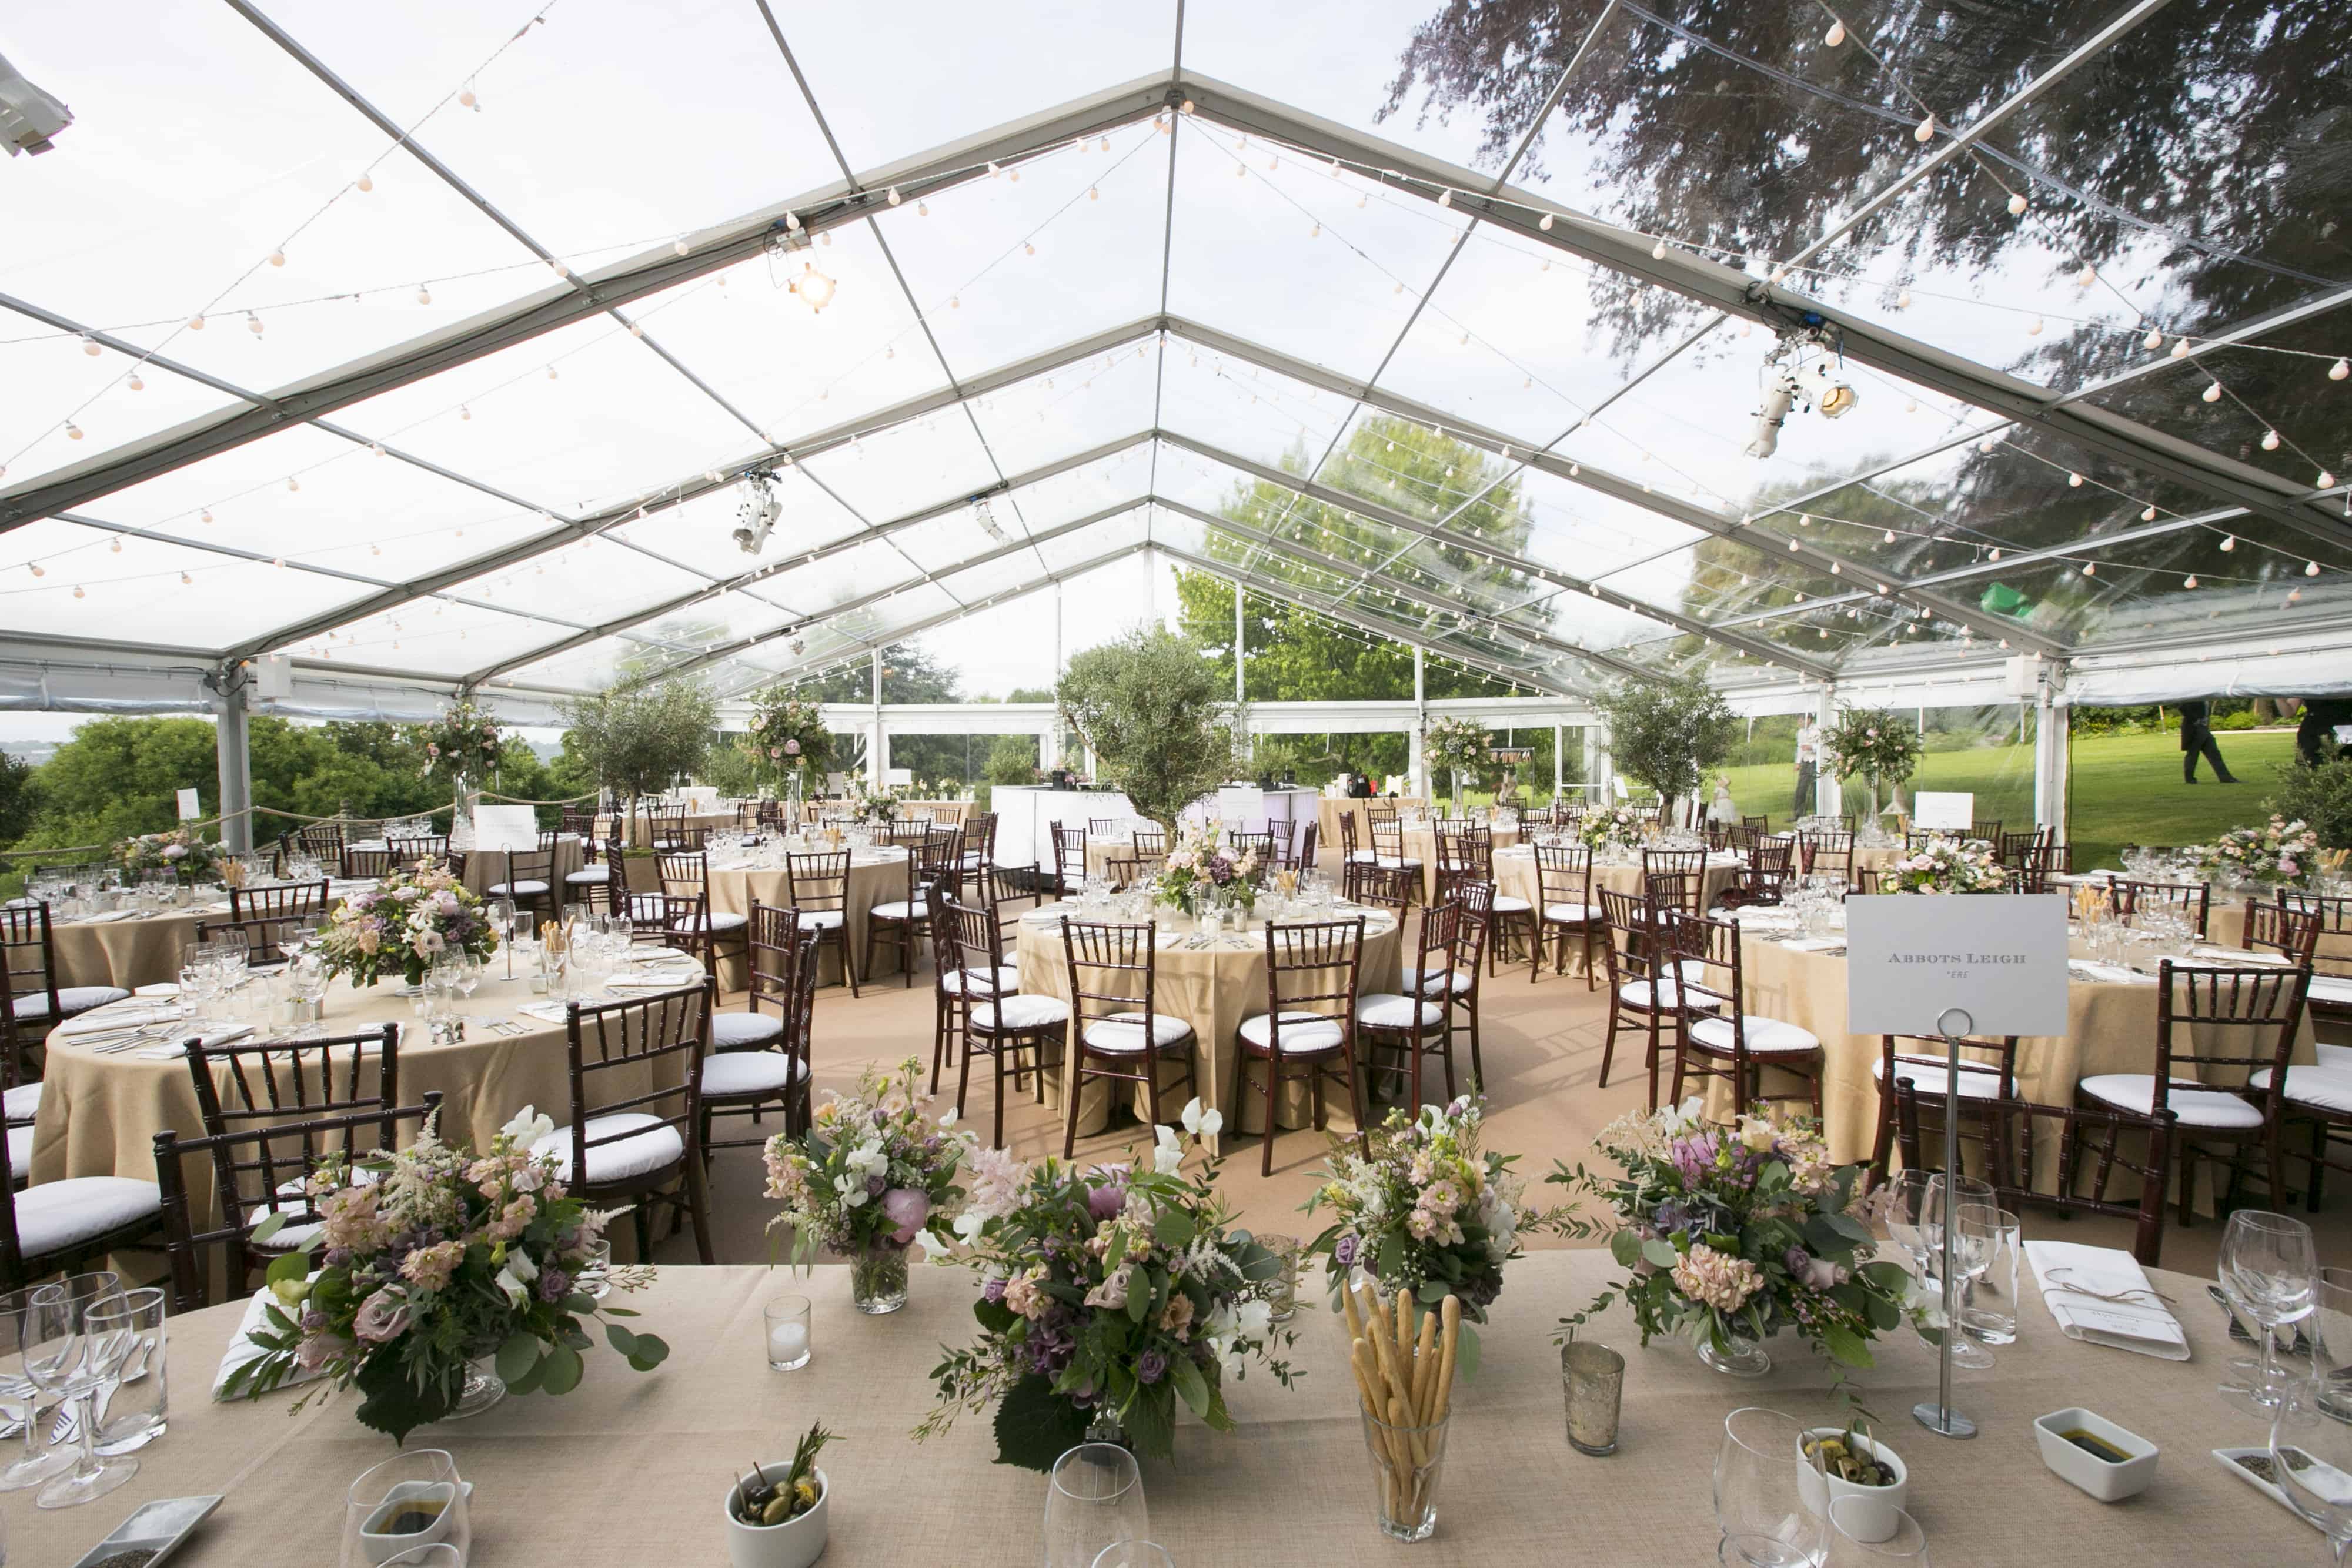 Clear roofed and walled wedding marquee in a countrside setting filled with beautifully dressed tables covered in flowers